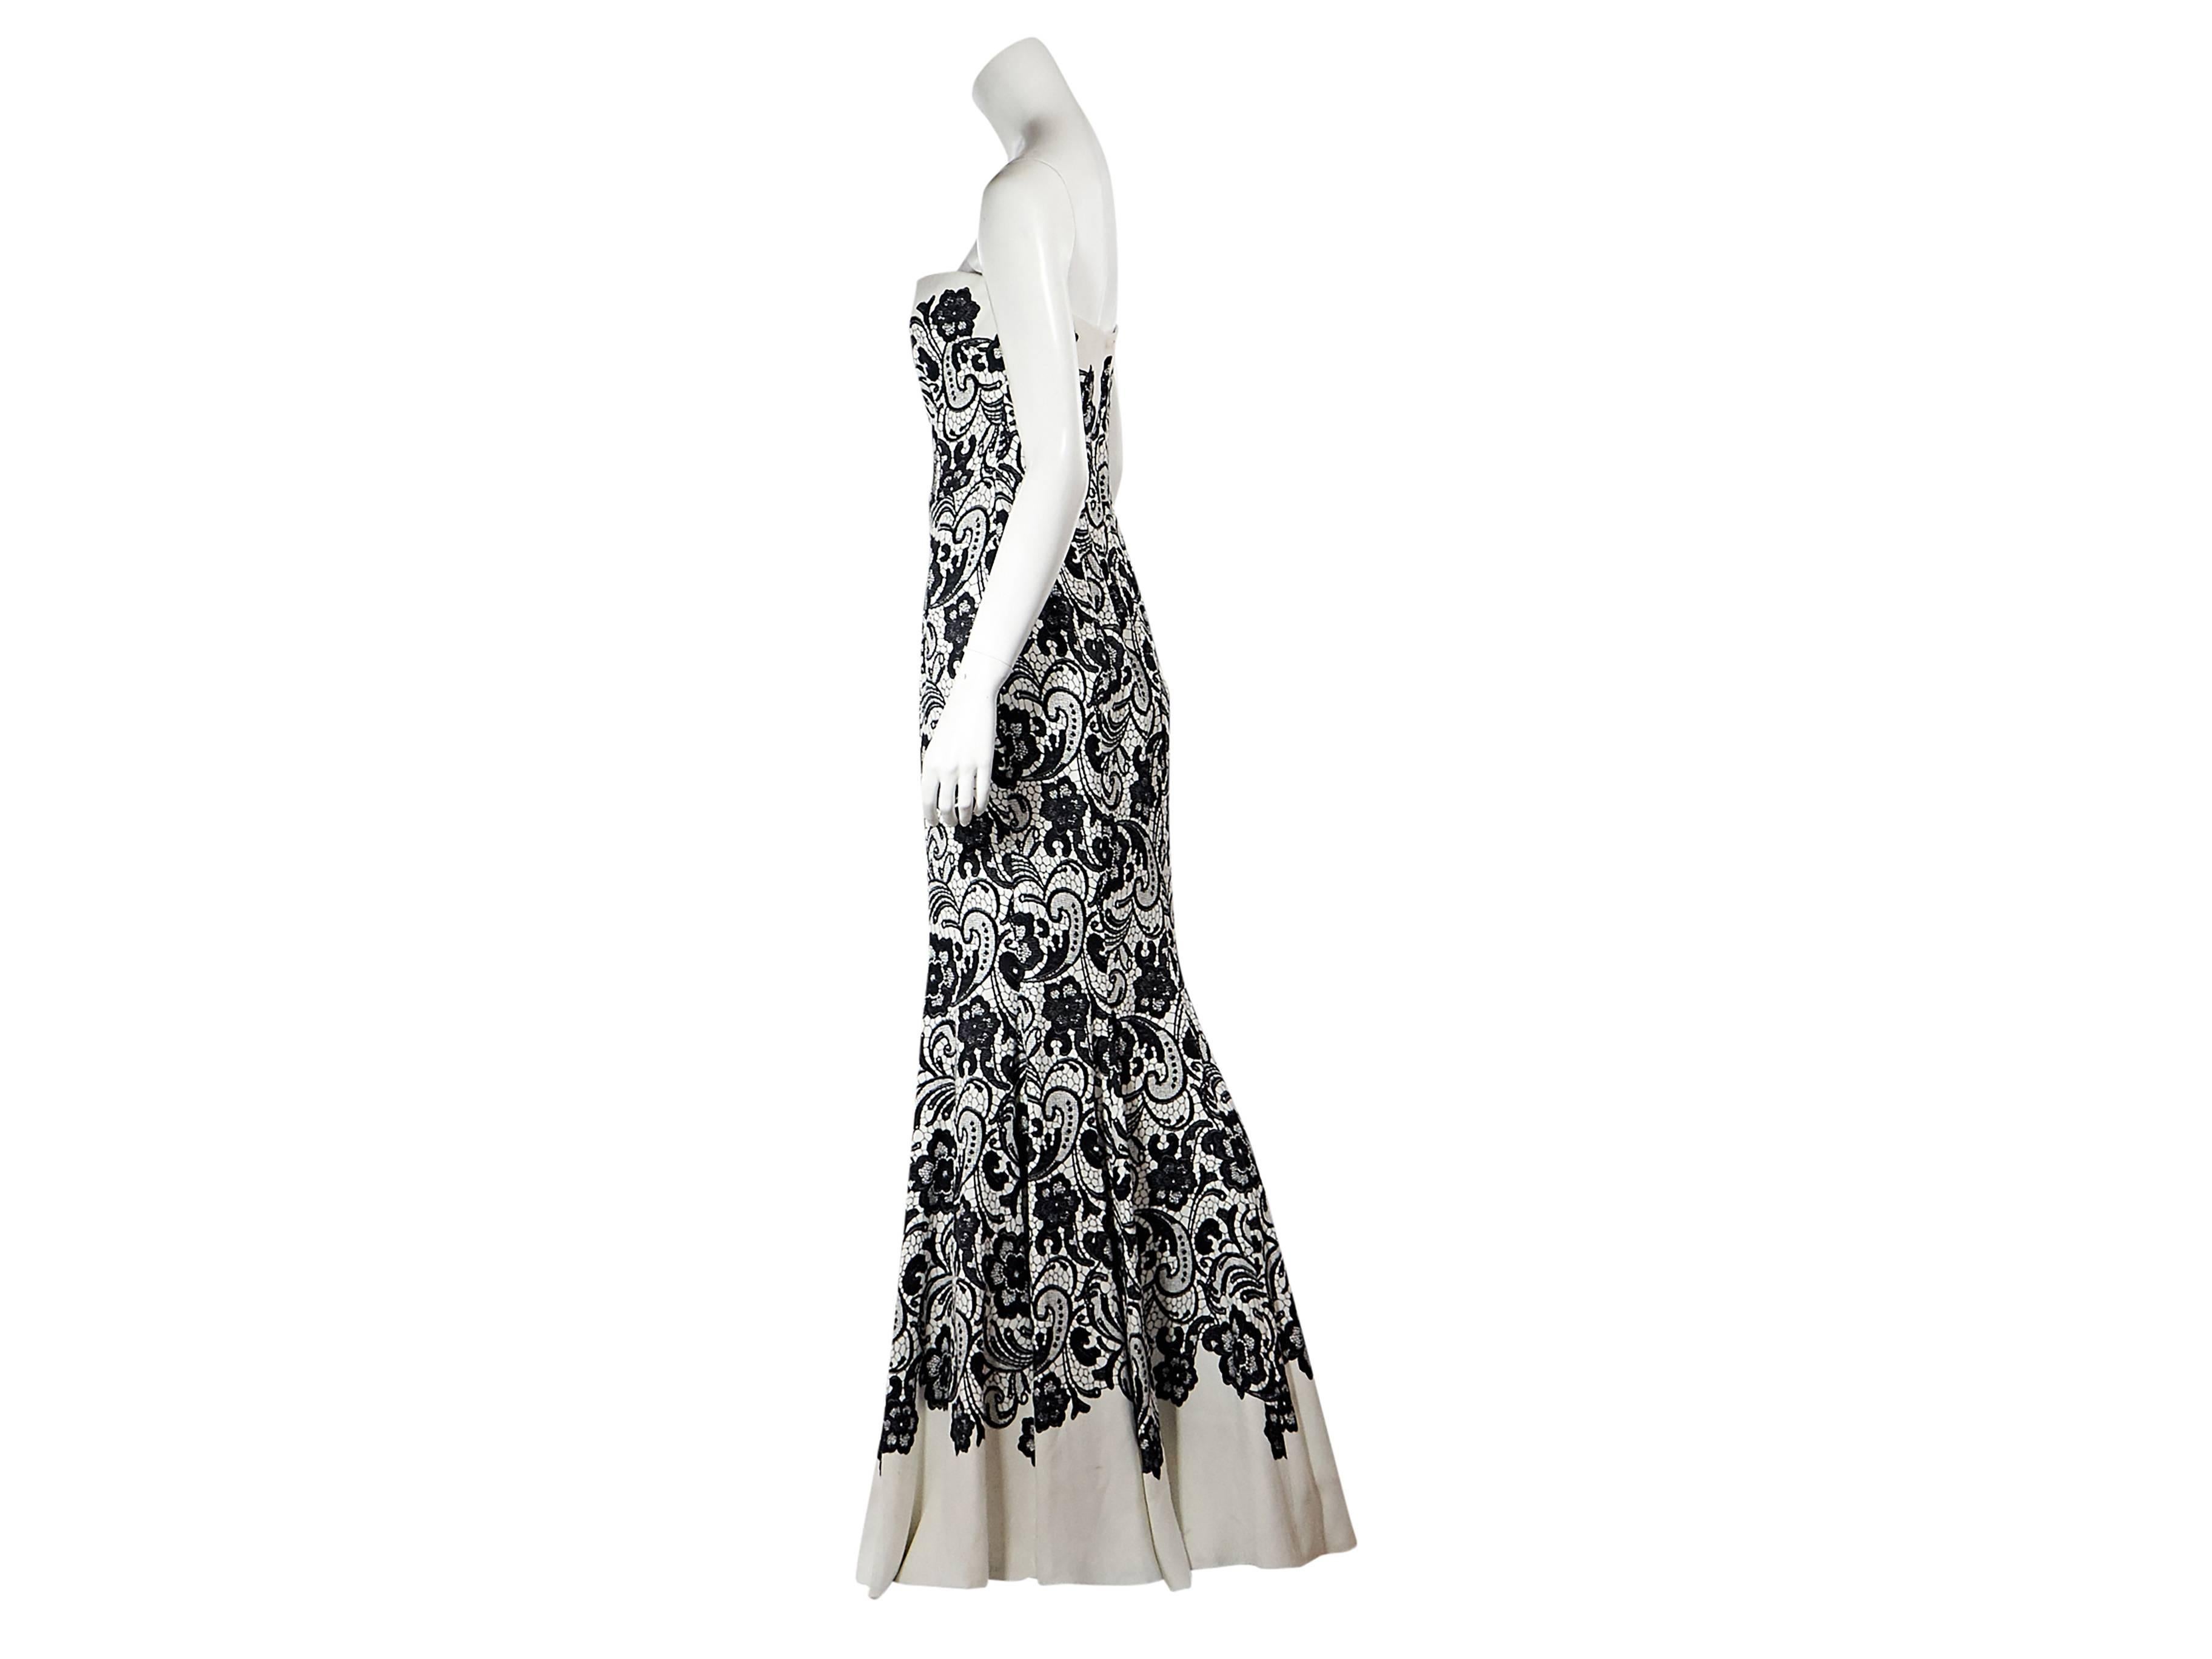 Product details: White and black strapless floral lace gown by Dolce & Gabbana. Formfitting silhouette. Concealed back zip closure. Inner boned corset for structure. Label size IT 42. 
Condition: New with tags. 
Est. Retail $ 6,225.00